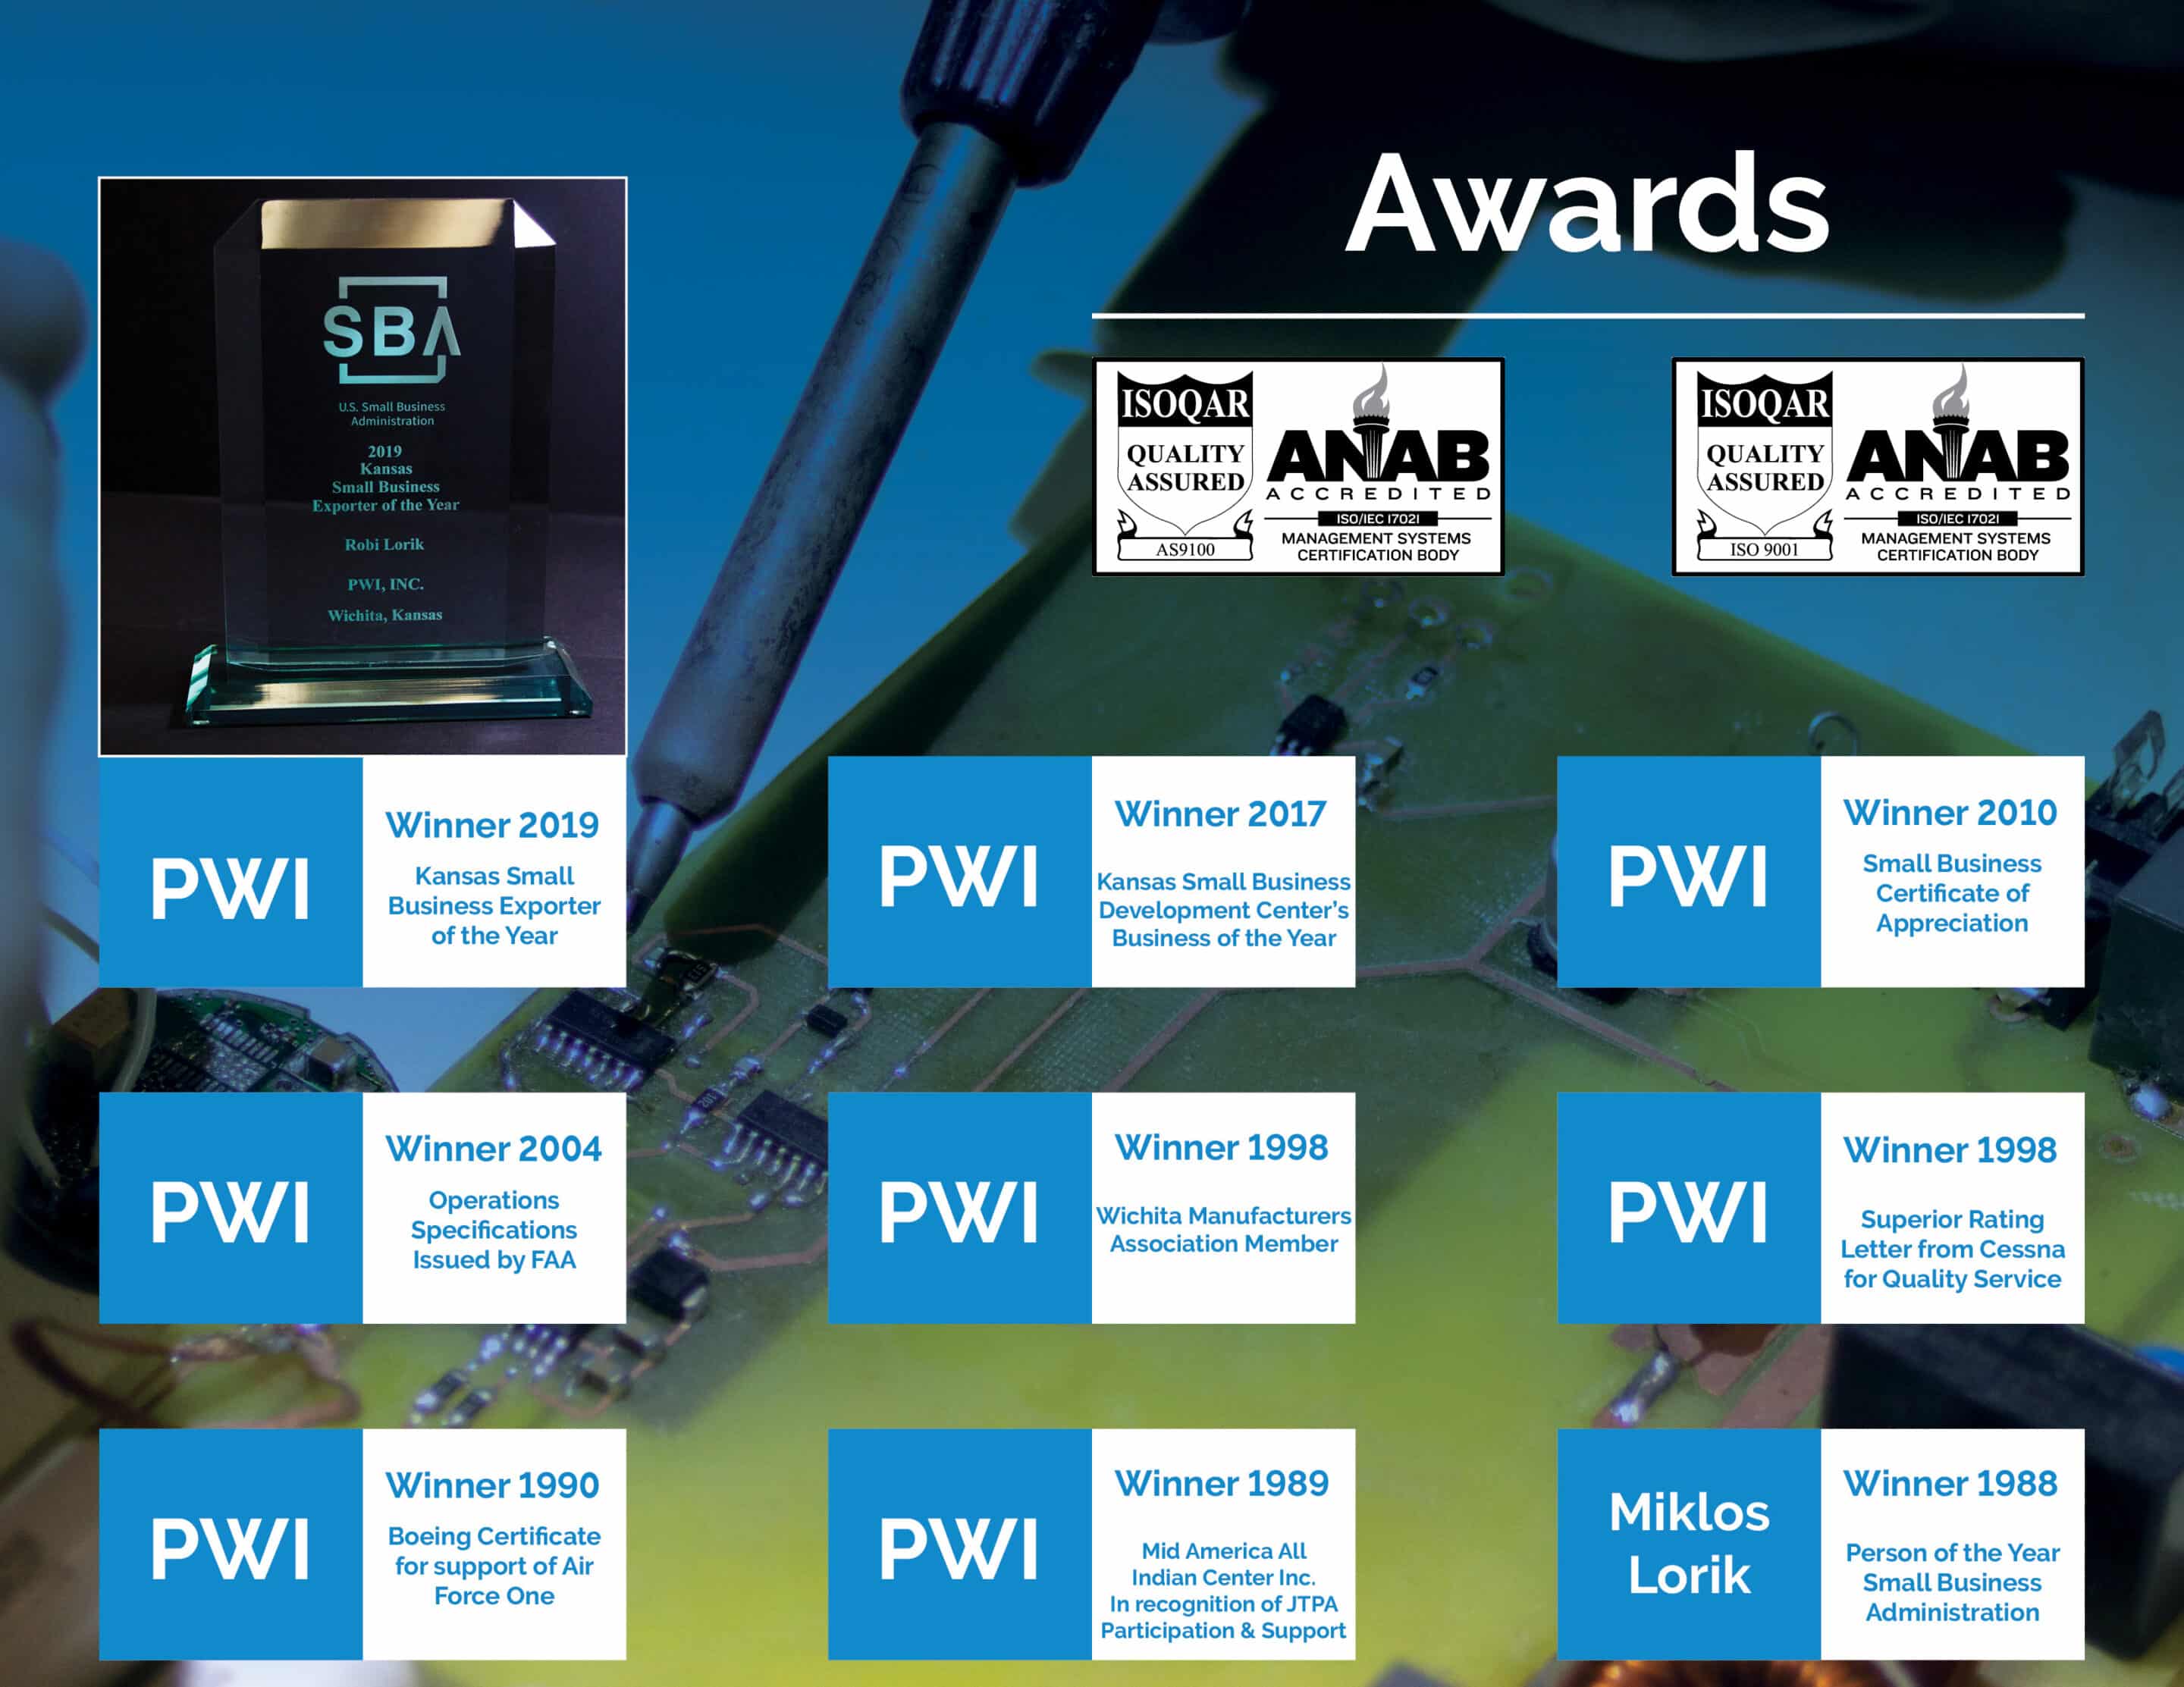 PWI has offered awarding winning products and services since 1963.